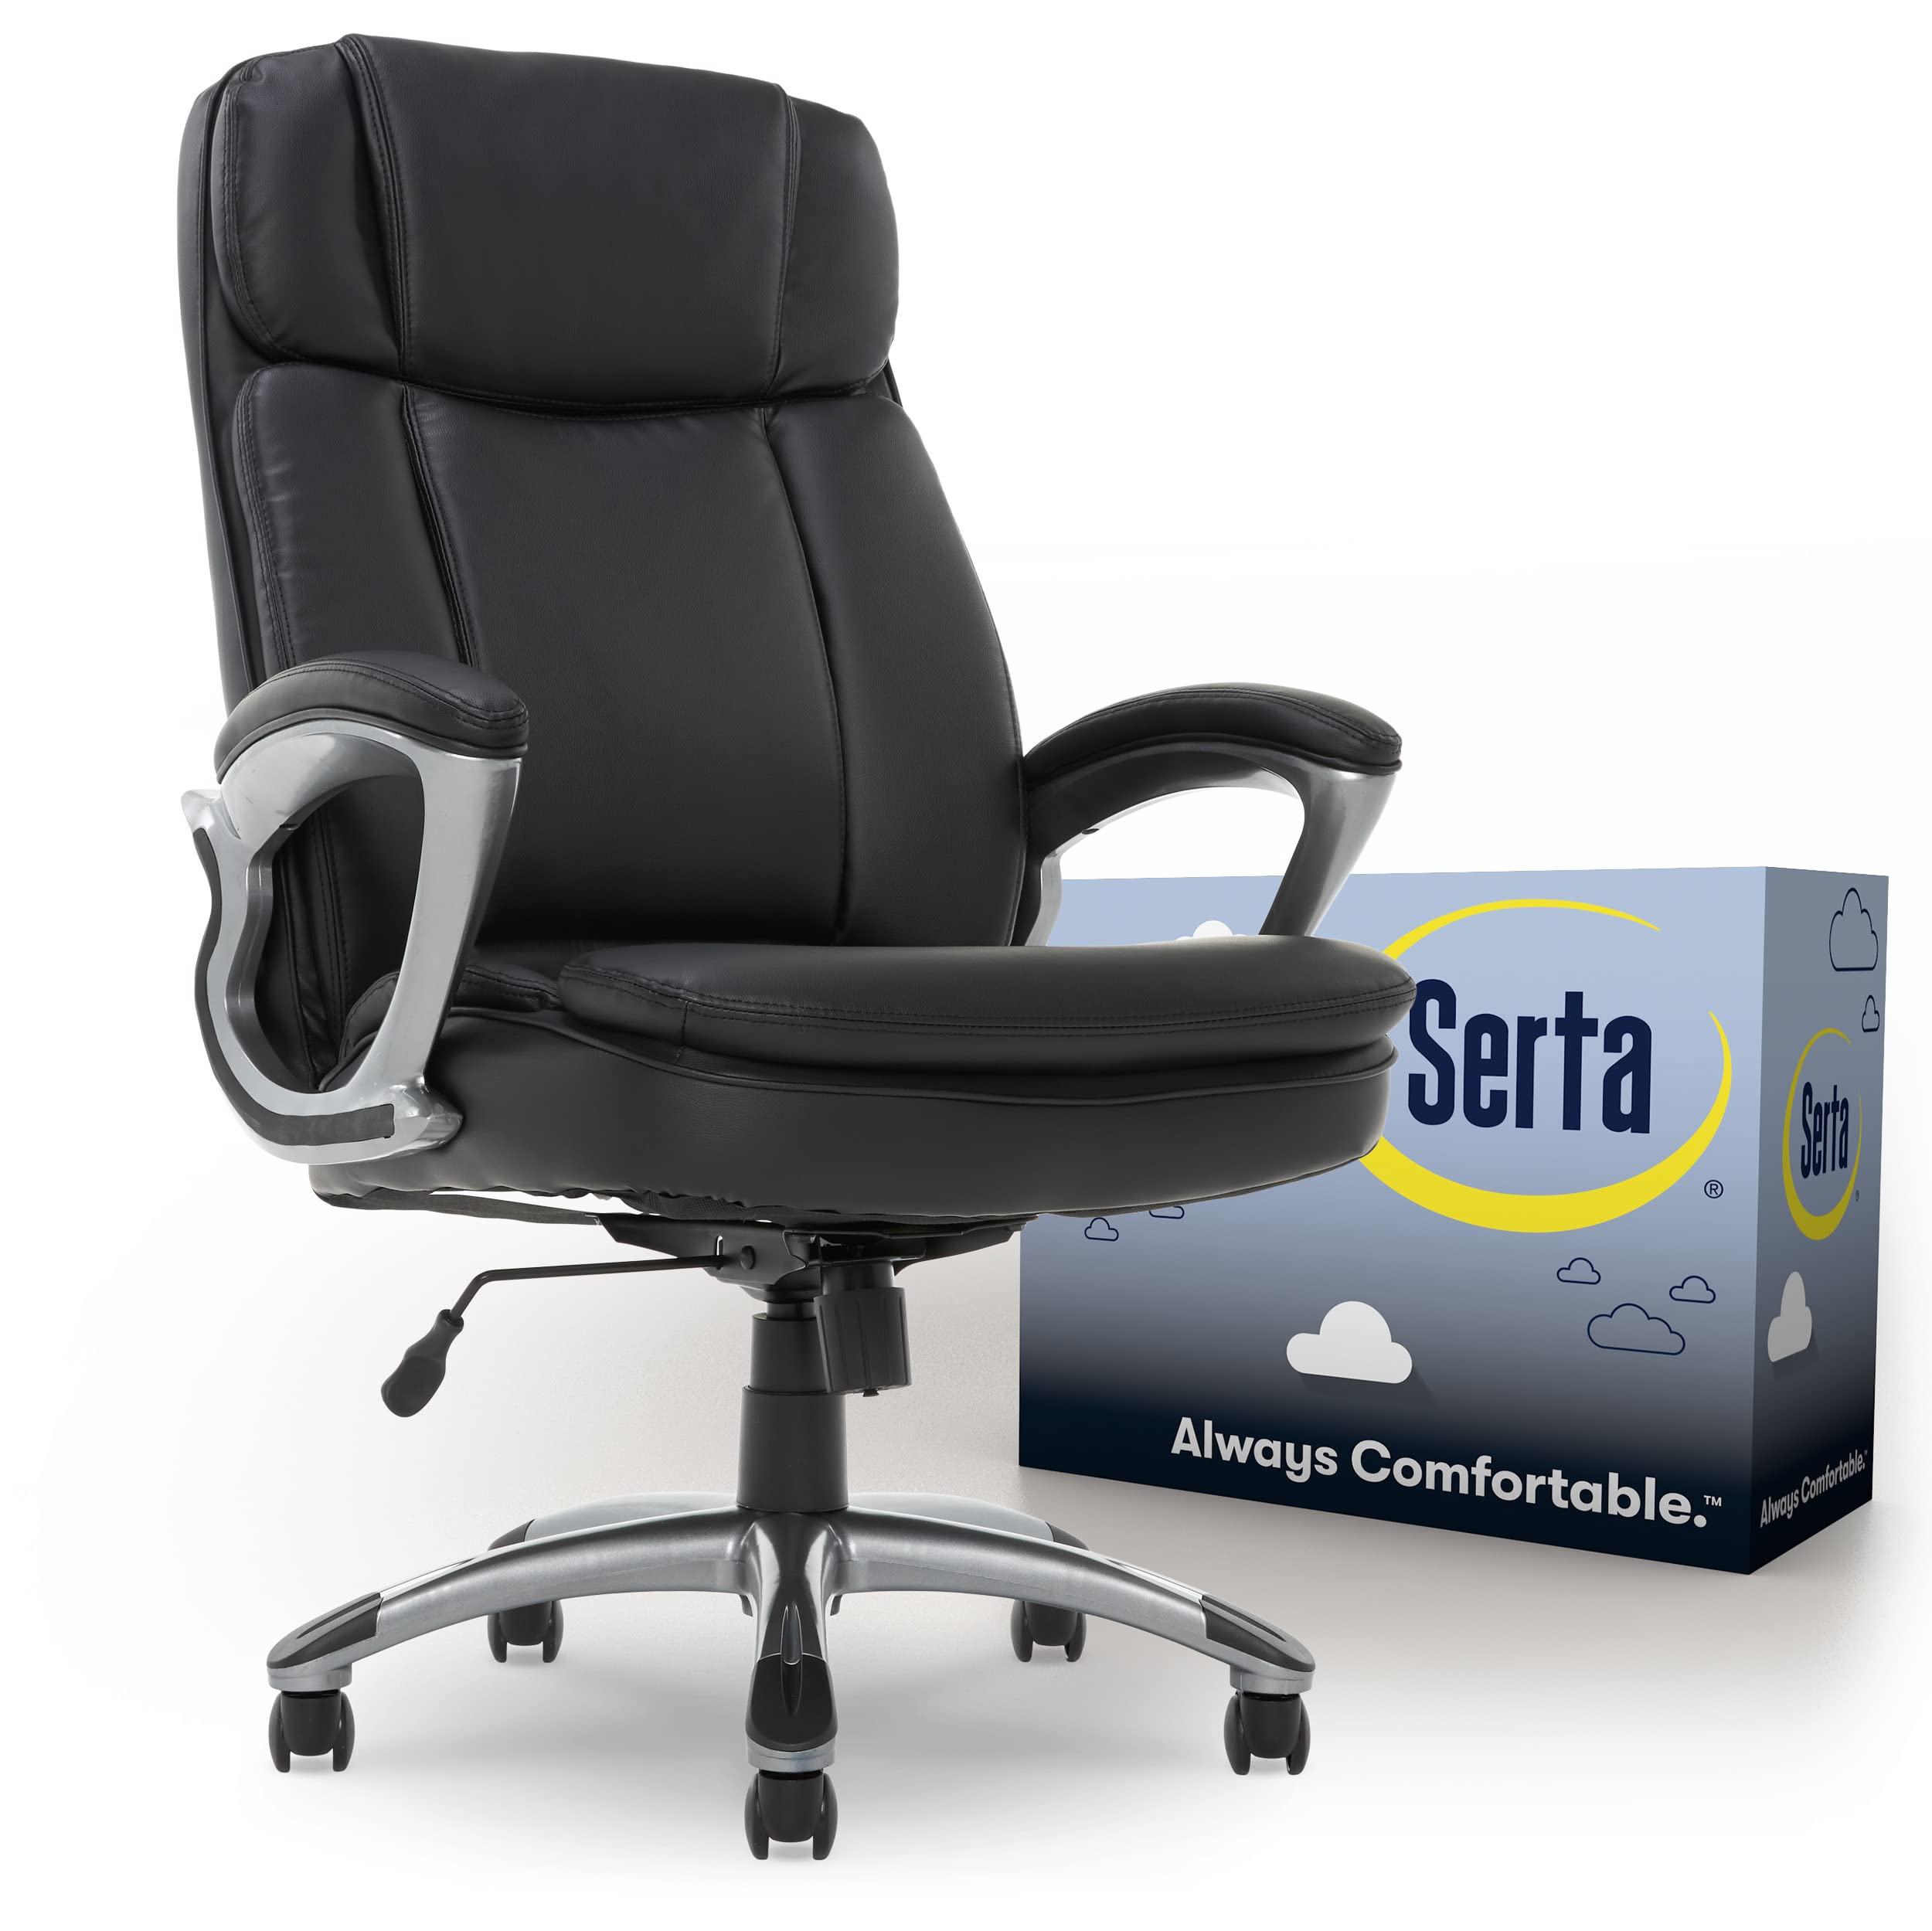 Serta Leather Big & Tall Executive Office Chair High Back All Day Comfort Ergonomic Lumbar Support, Bonded Leather